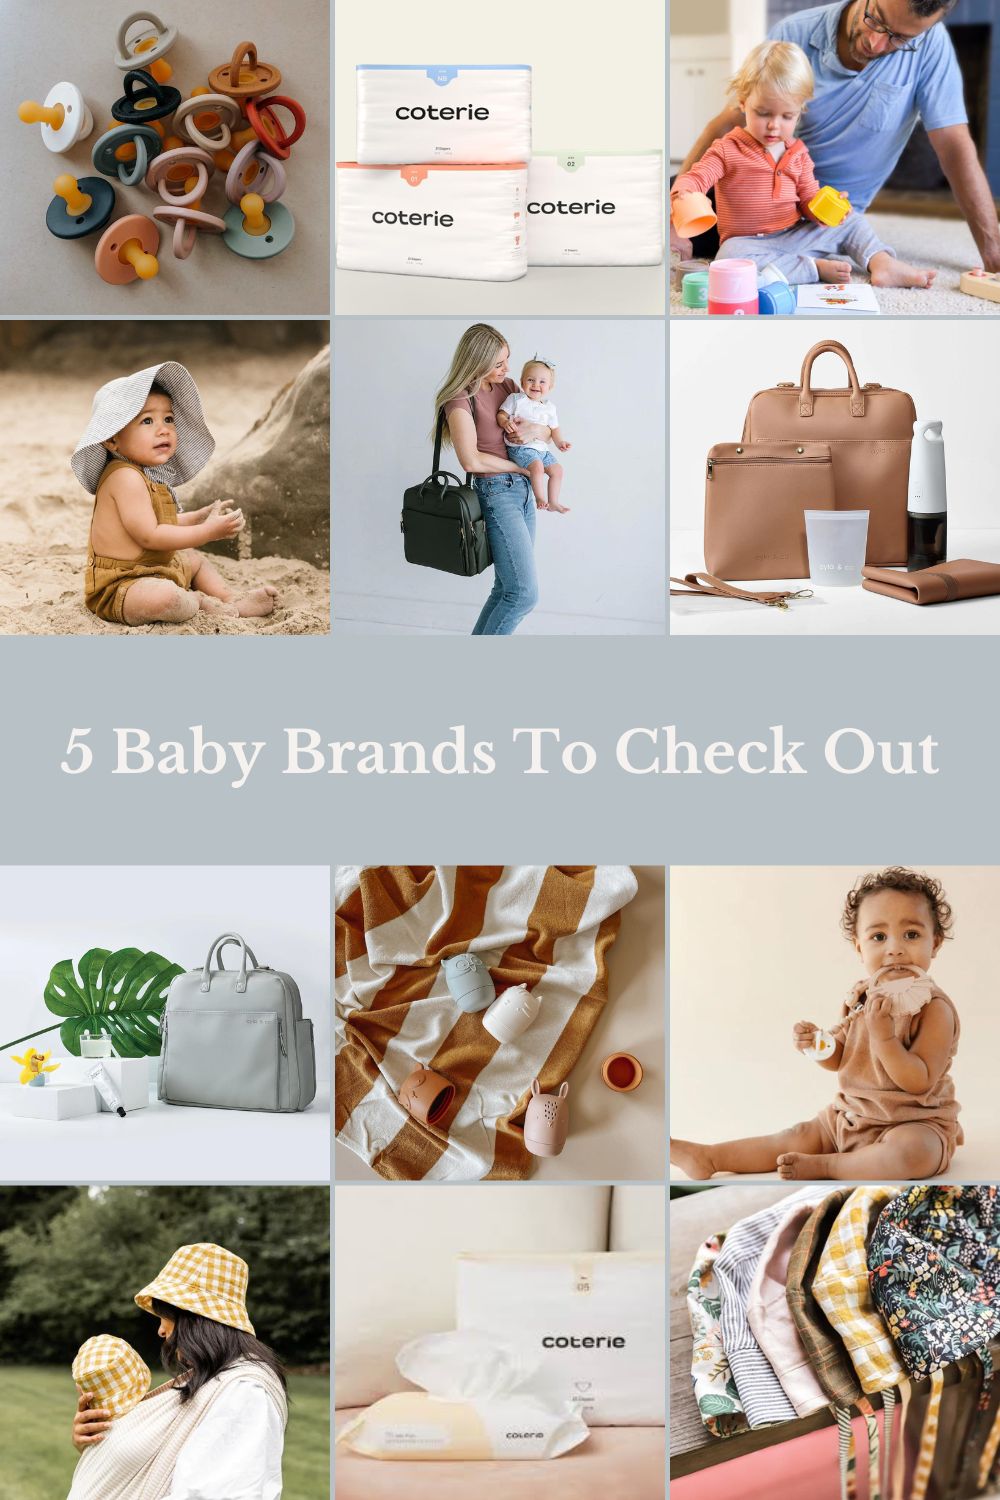 5 Baby Brands to Check Out